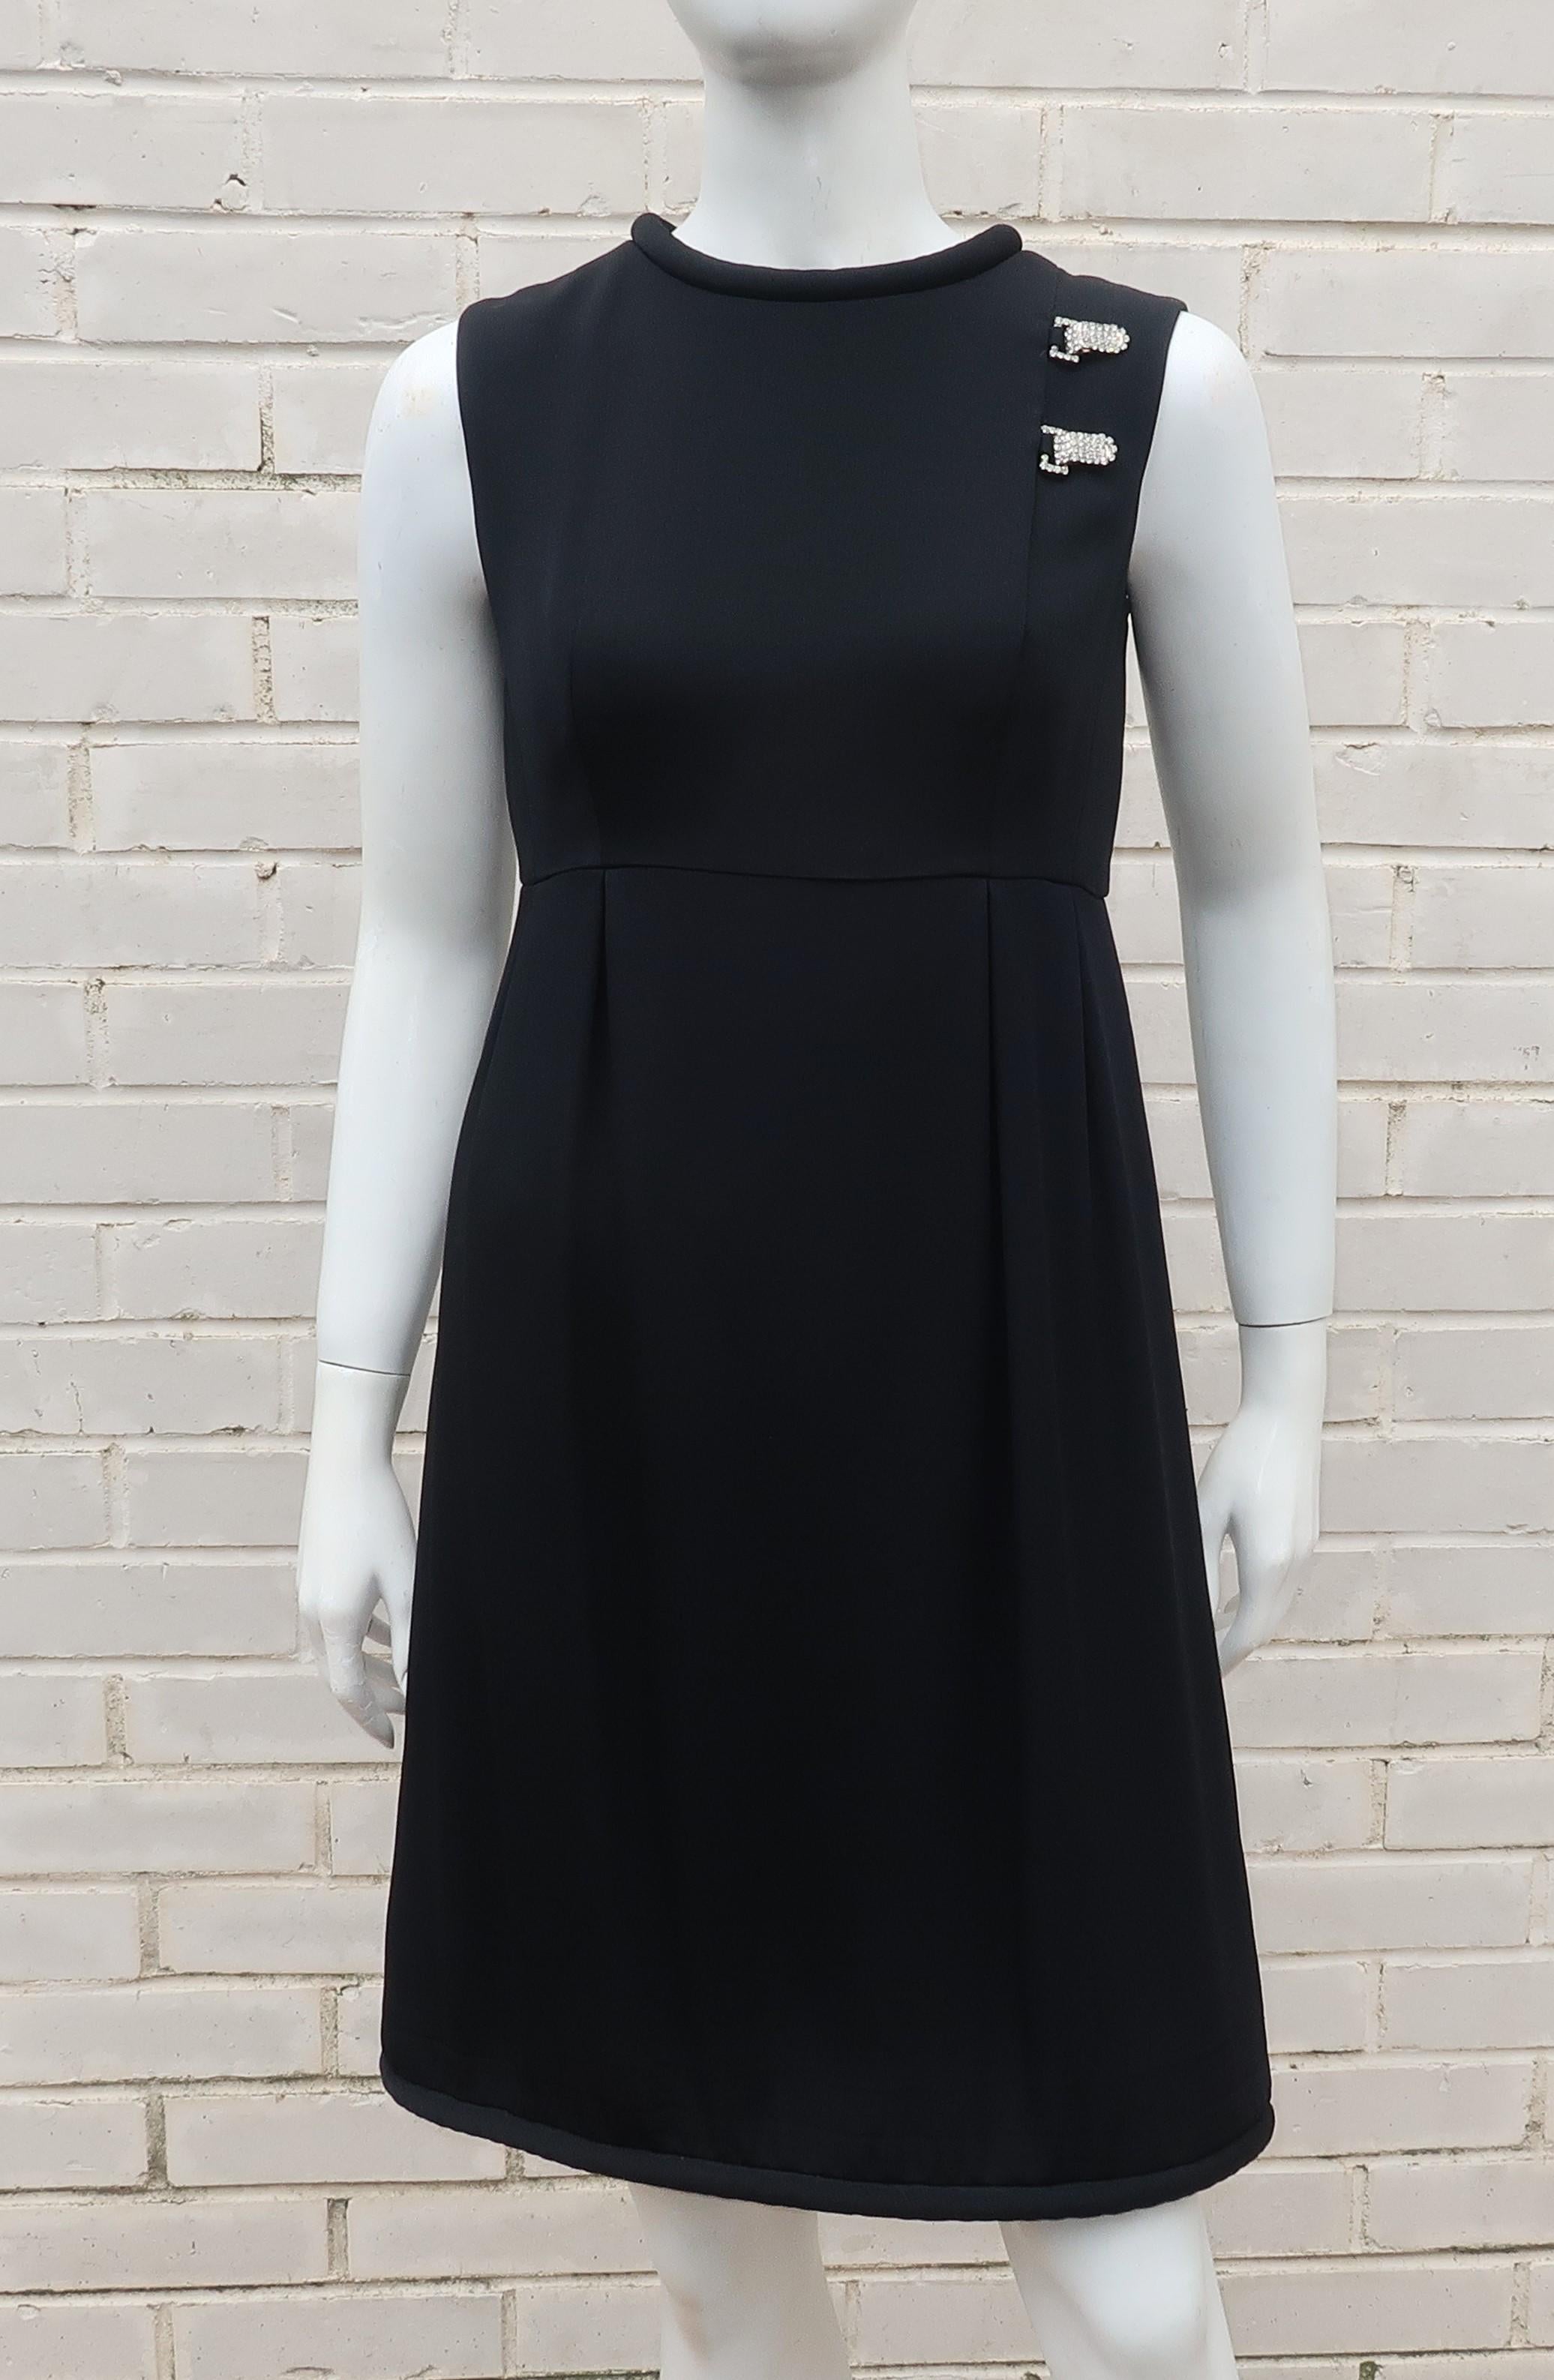 Saks Fifth Avenue youthful 1960's mod version of a classic 'little black dress' in a black crepe fabric that appears to be silk with rhinestone embellishments in the form of faux clip buckles.  The fabric is lined and hemmed with padded cording